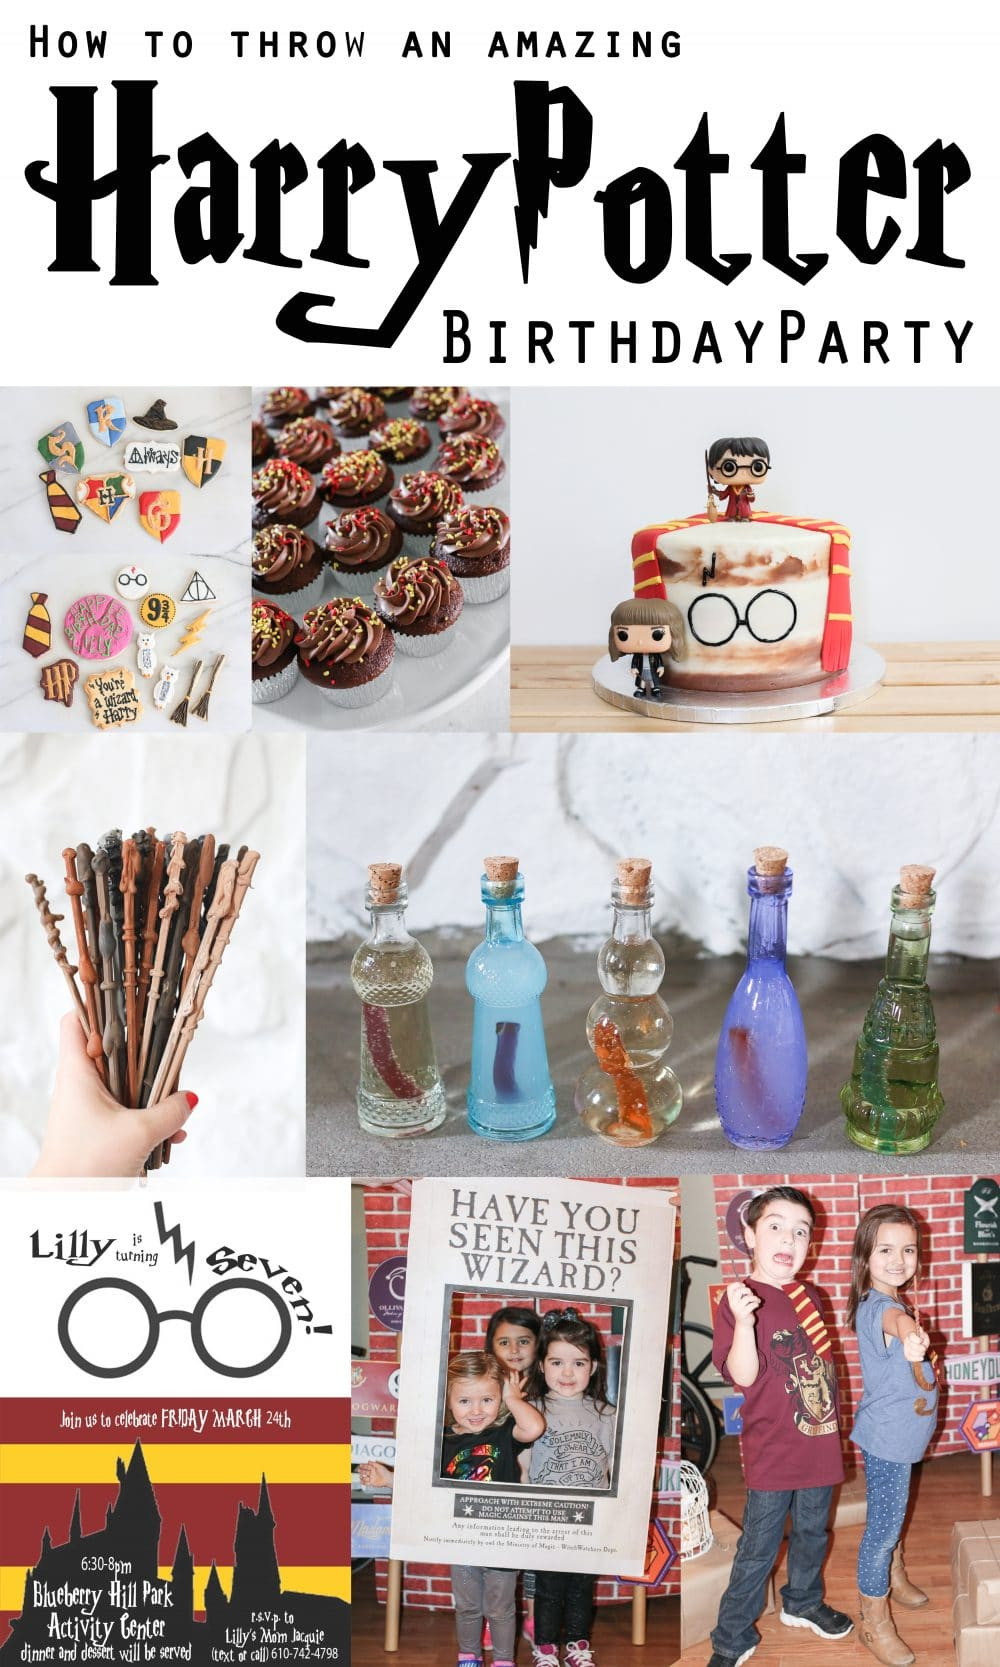 Harry Potter Birthday Party Ideas
 DIY Harry Potter Party The Sweeter Side of Mommyhood